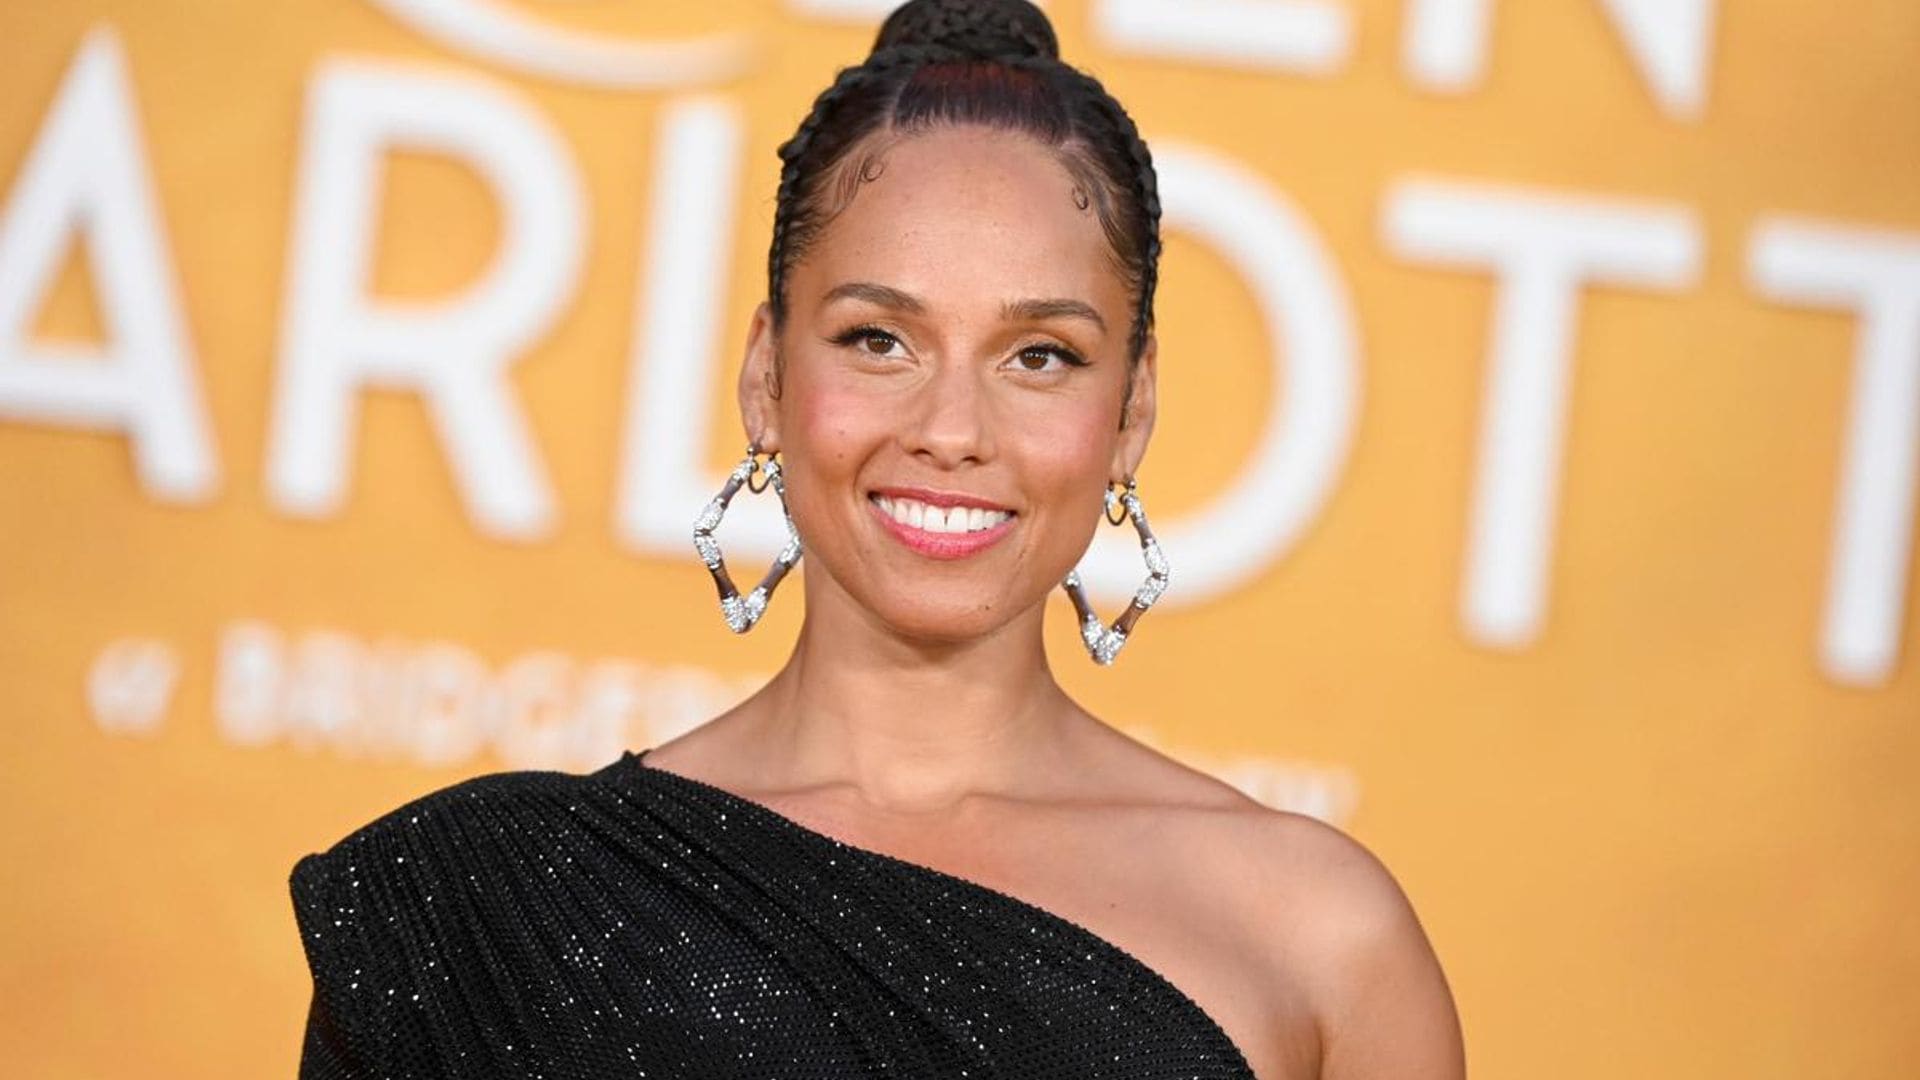 Alicia Keys’ tour heads to Latin America — check out the dates!